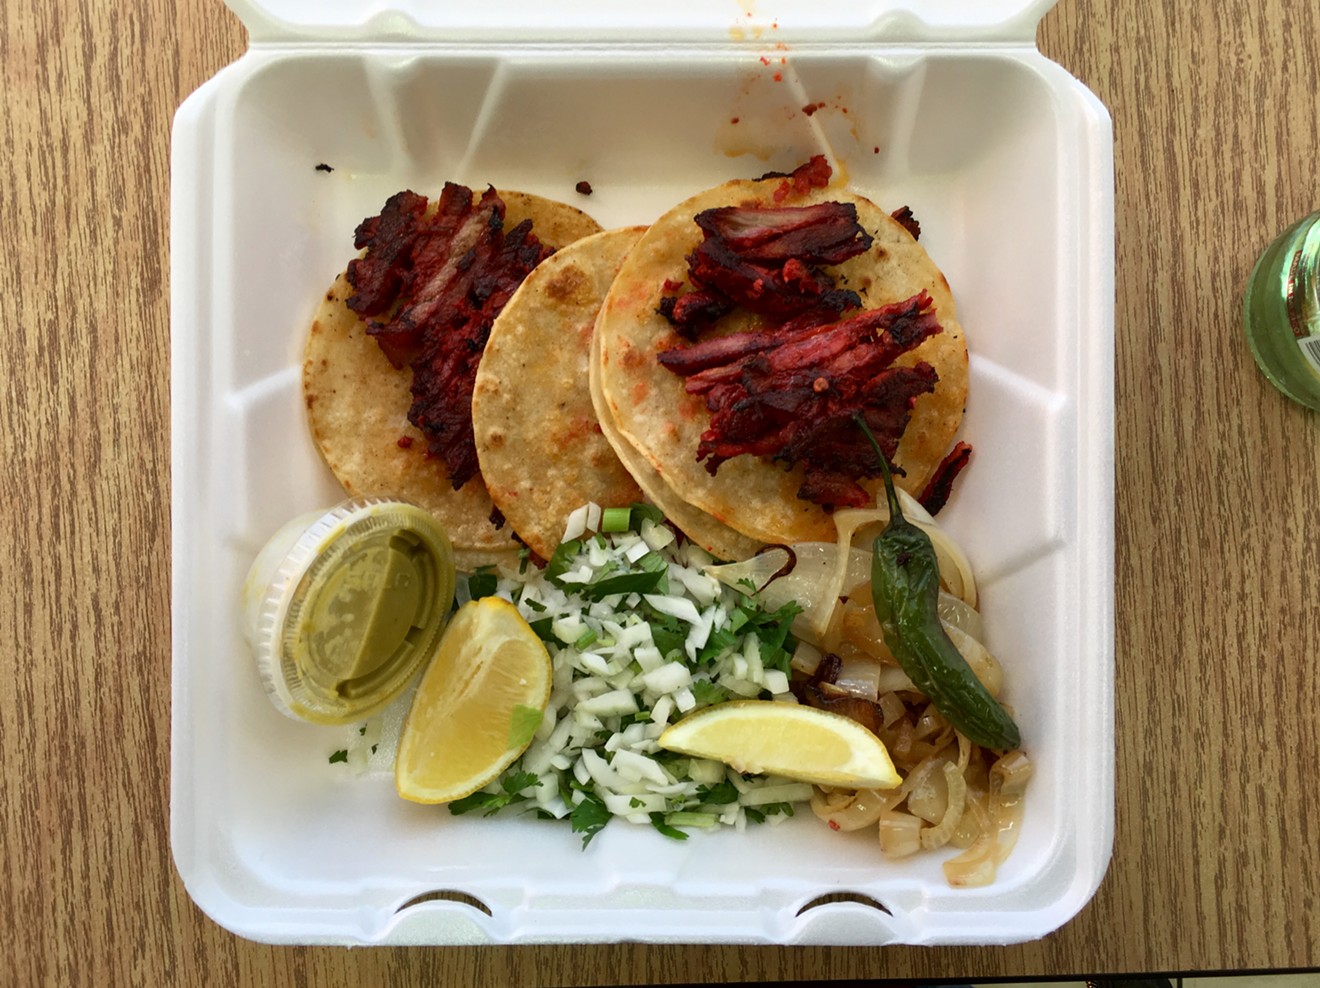 Three tacos with butter-grilled tortillas and tender pork sliced off the trompo.